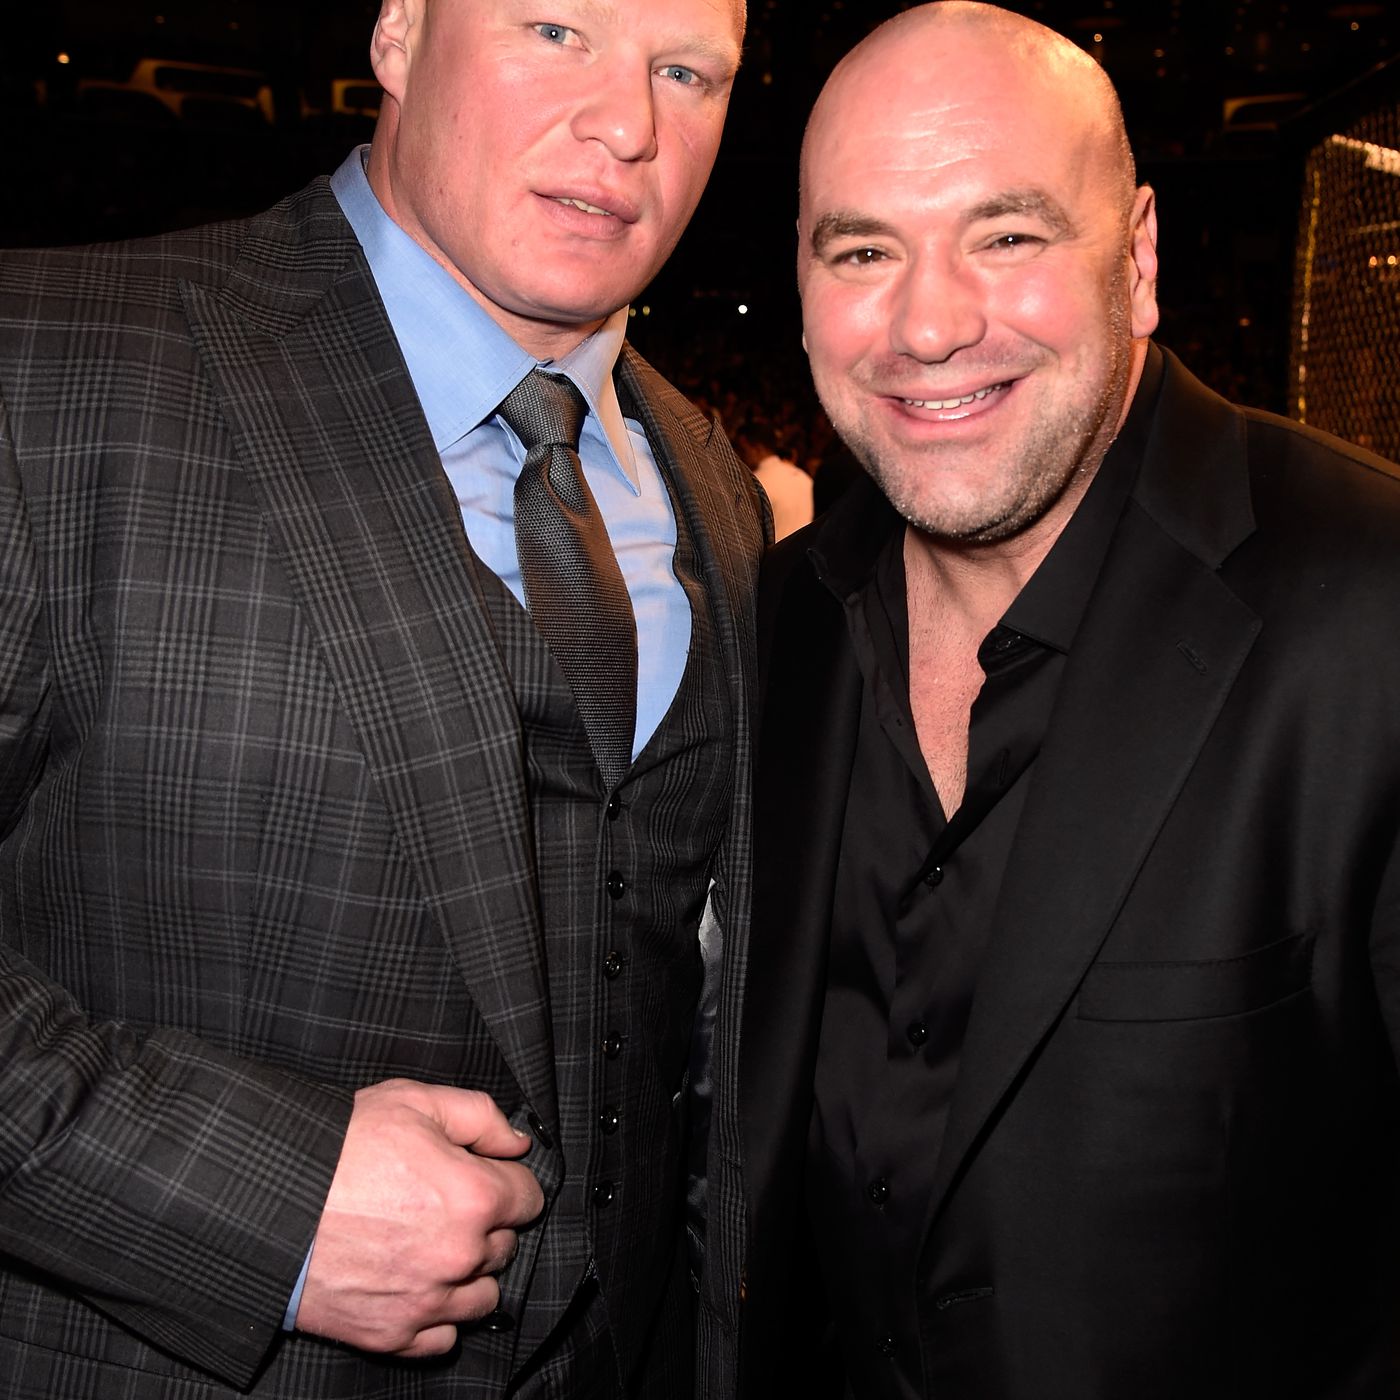 Brock Lesnar compares 'father figure' Vince McMahon with Dana White, says  UFC should've paid 'more' - Bloody Elbow